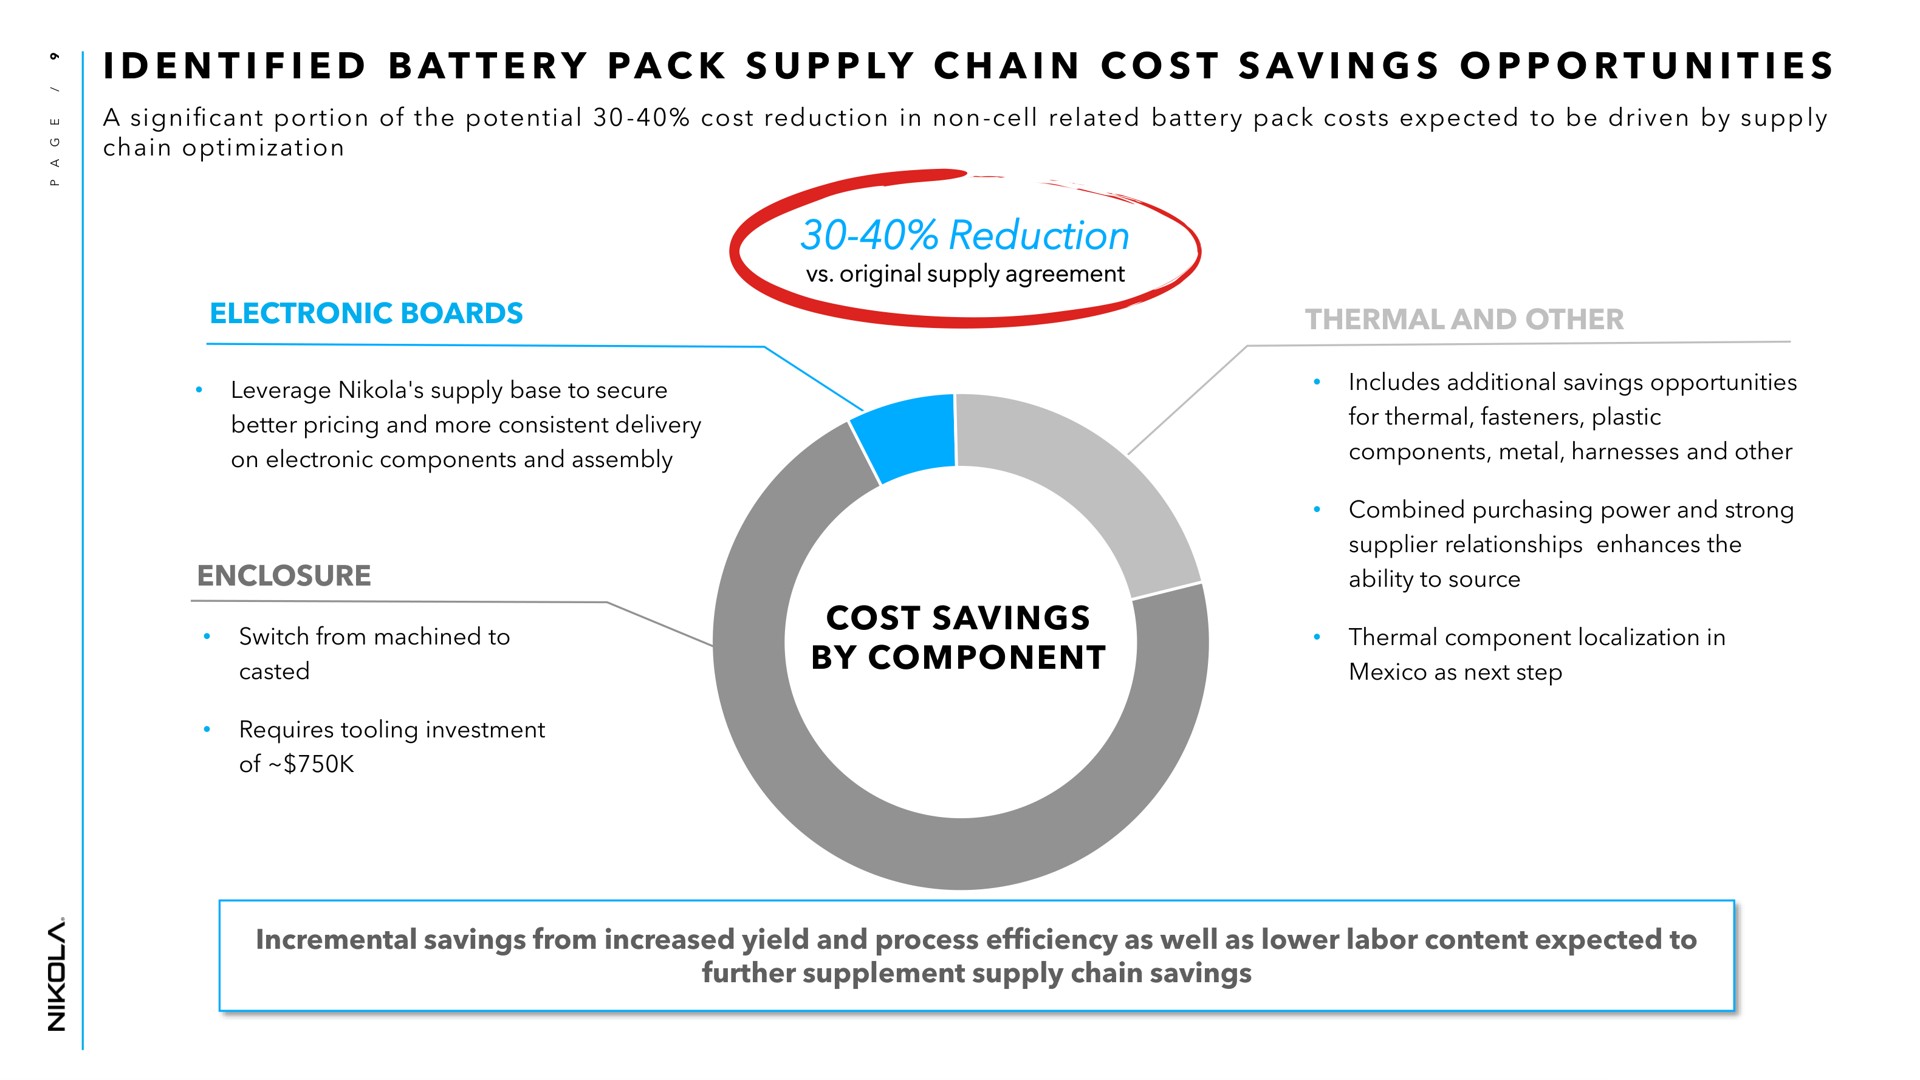 i i i a a a i a i i i reduction cost savings by component identified battery pack supply chain opportunities | Nikola